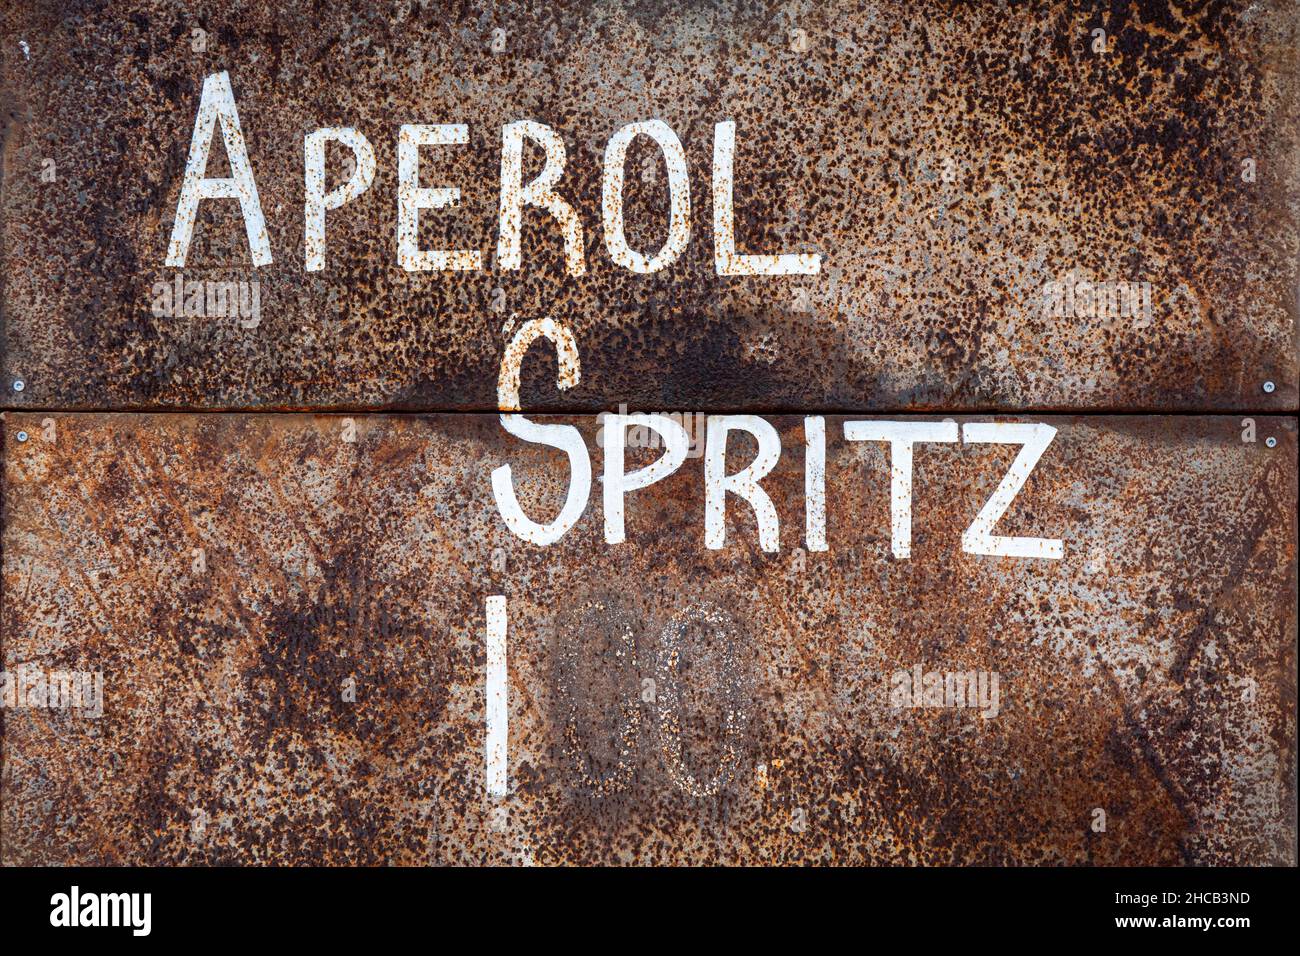 Aperol Spritz price. White text on a rusty surface. Stock Photo